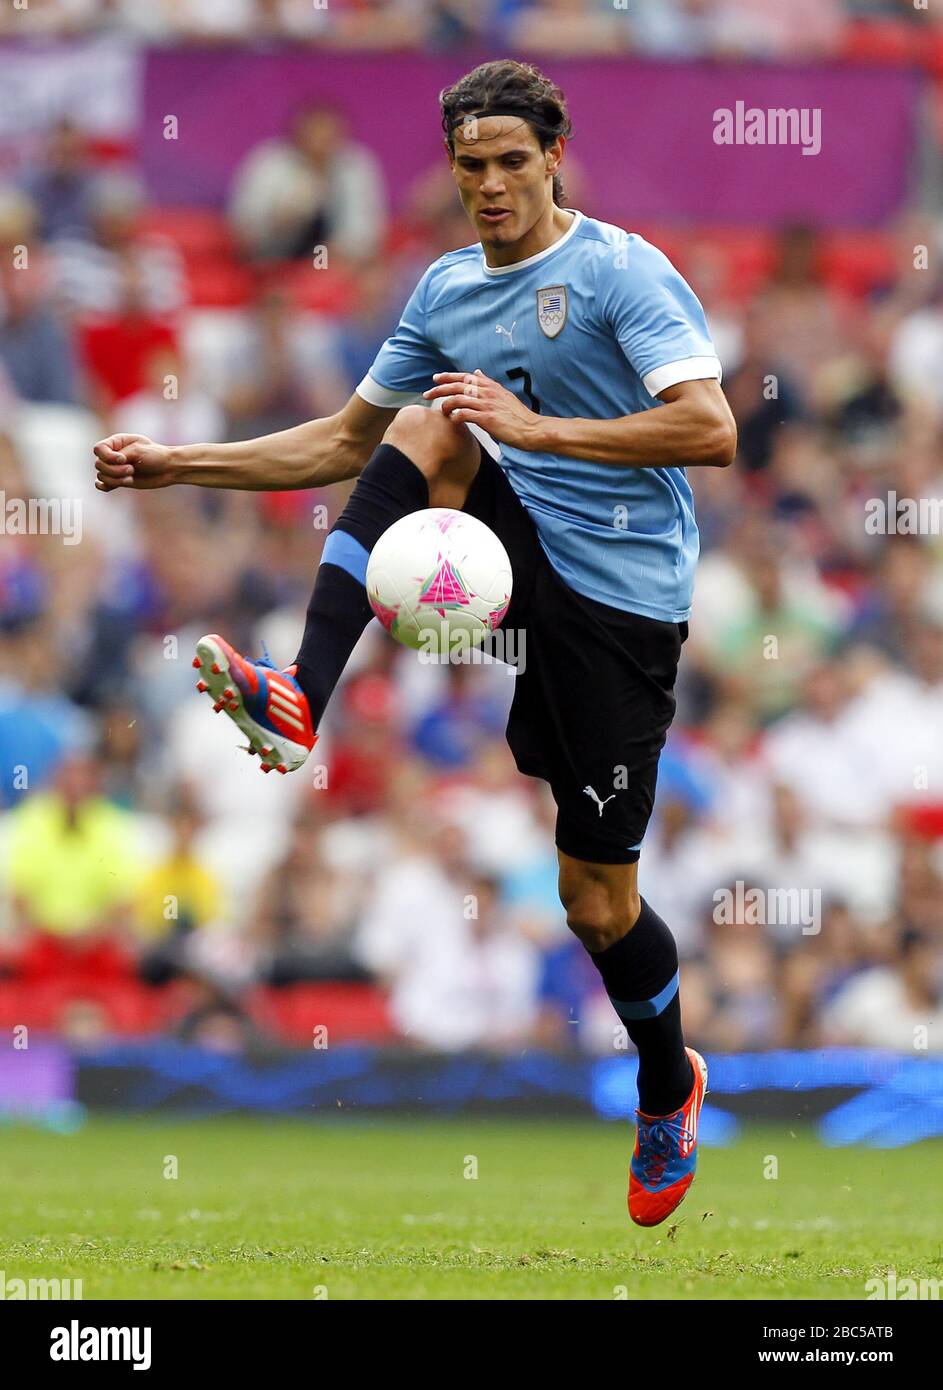 Uruguay's Edinson Cavani during the UAE v Uruguay, Mens Football, First Round, Group A match at Old Trafford, Manchester. Stock Photo